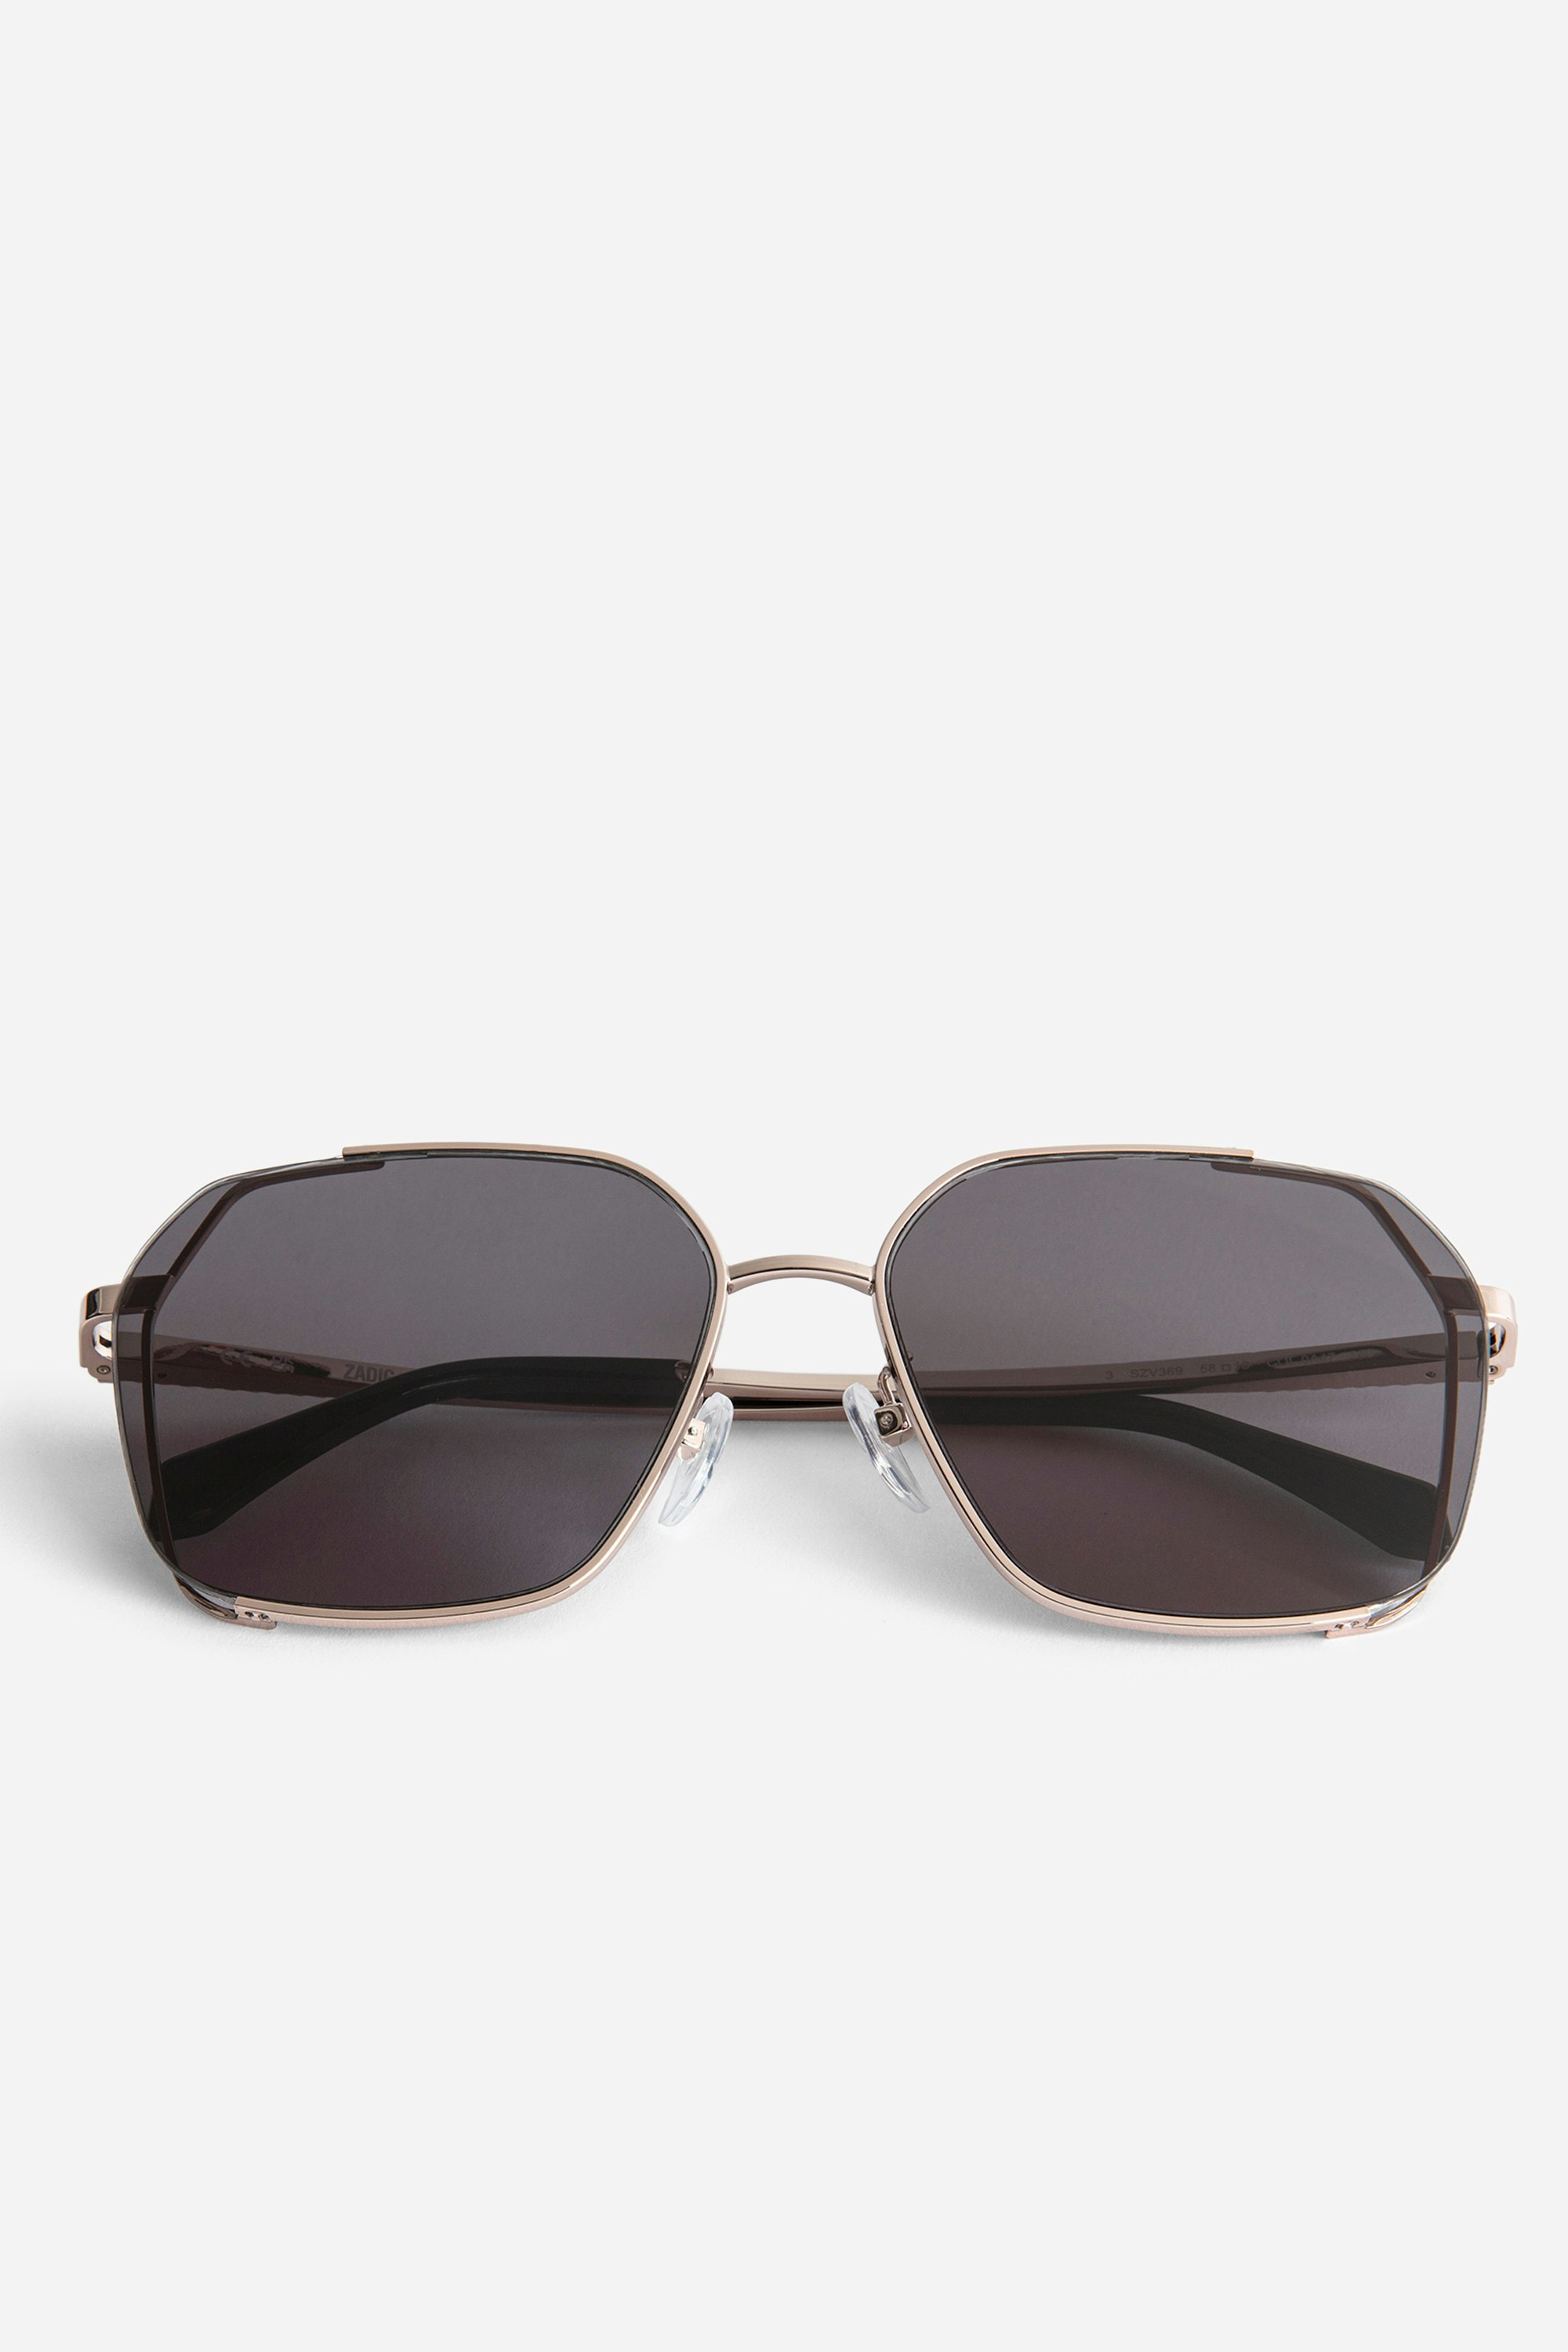 ZV23H5 Sunglasses Unisex black rounded square sunglasses with the ZV logo on the temples.